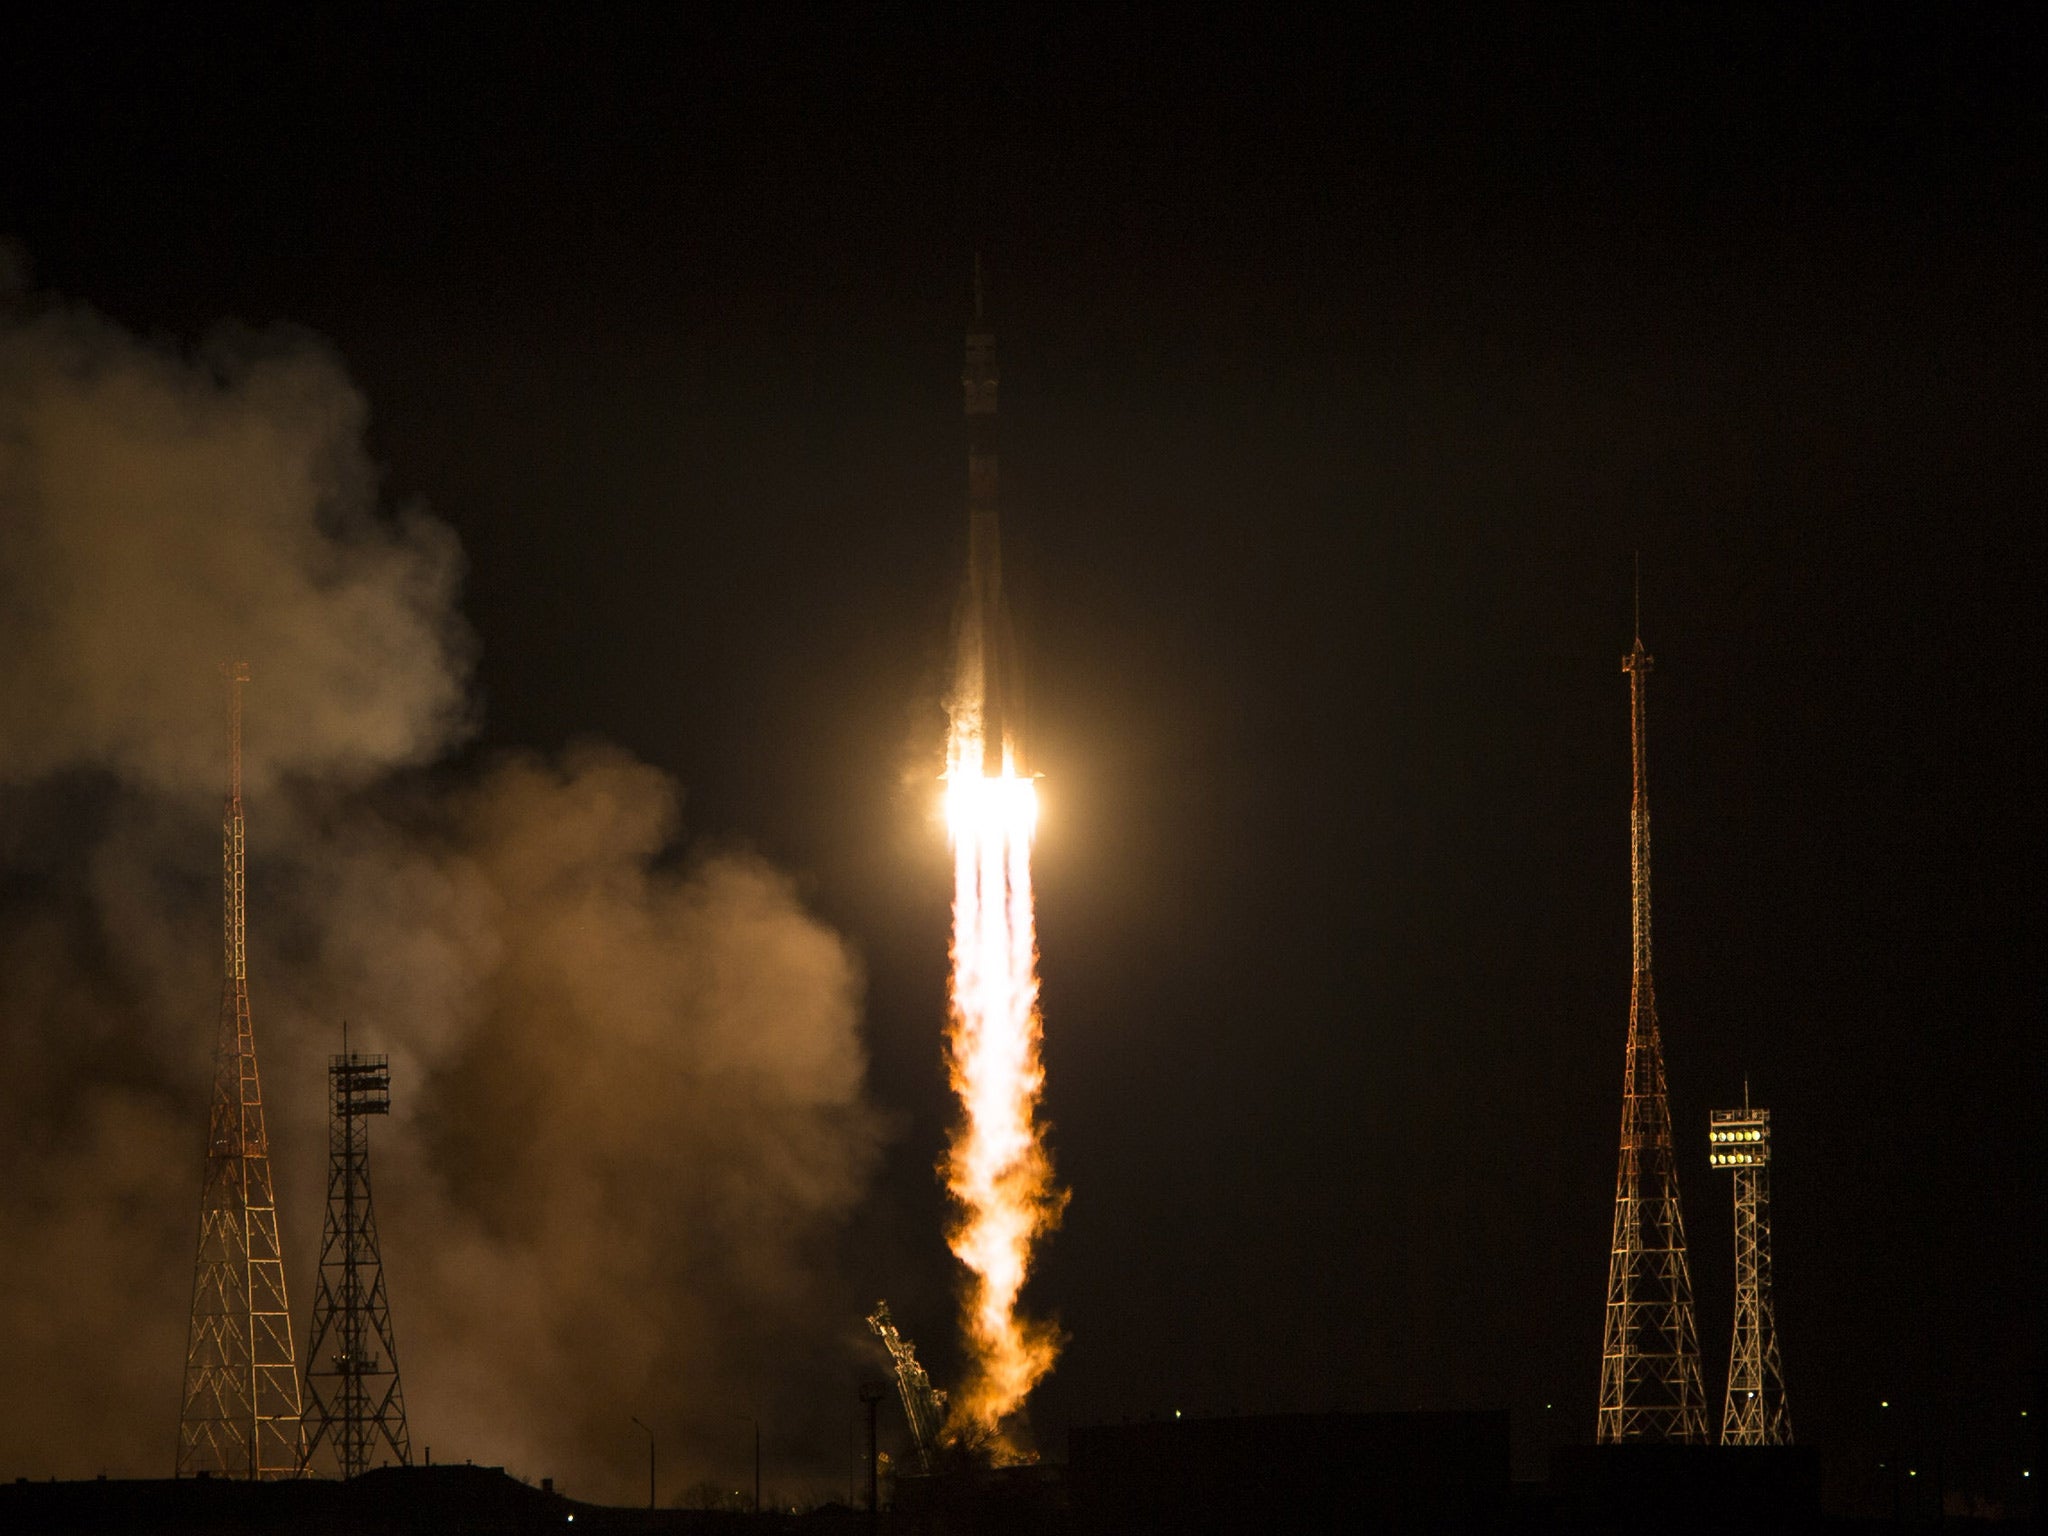 The Soyuz rocket launches from the Baikonur Cosmodrome in Kazakhstan on Monday morning. Source: NASA/Aubrey Gemignani